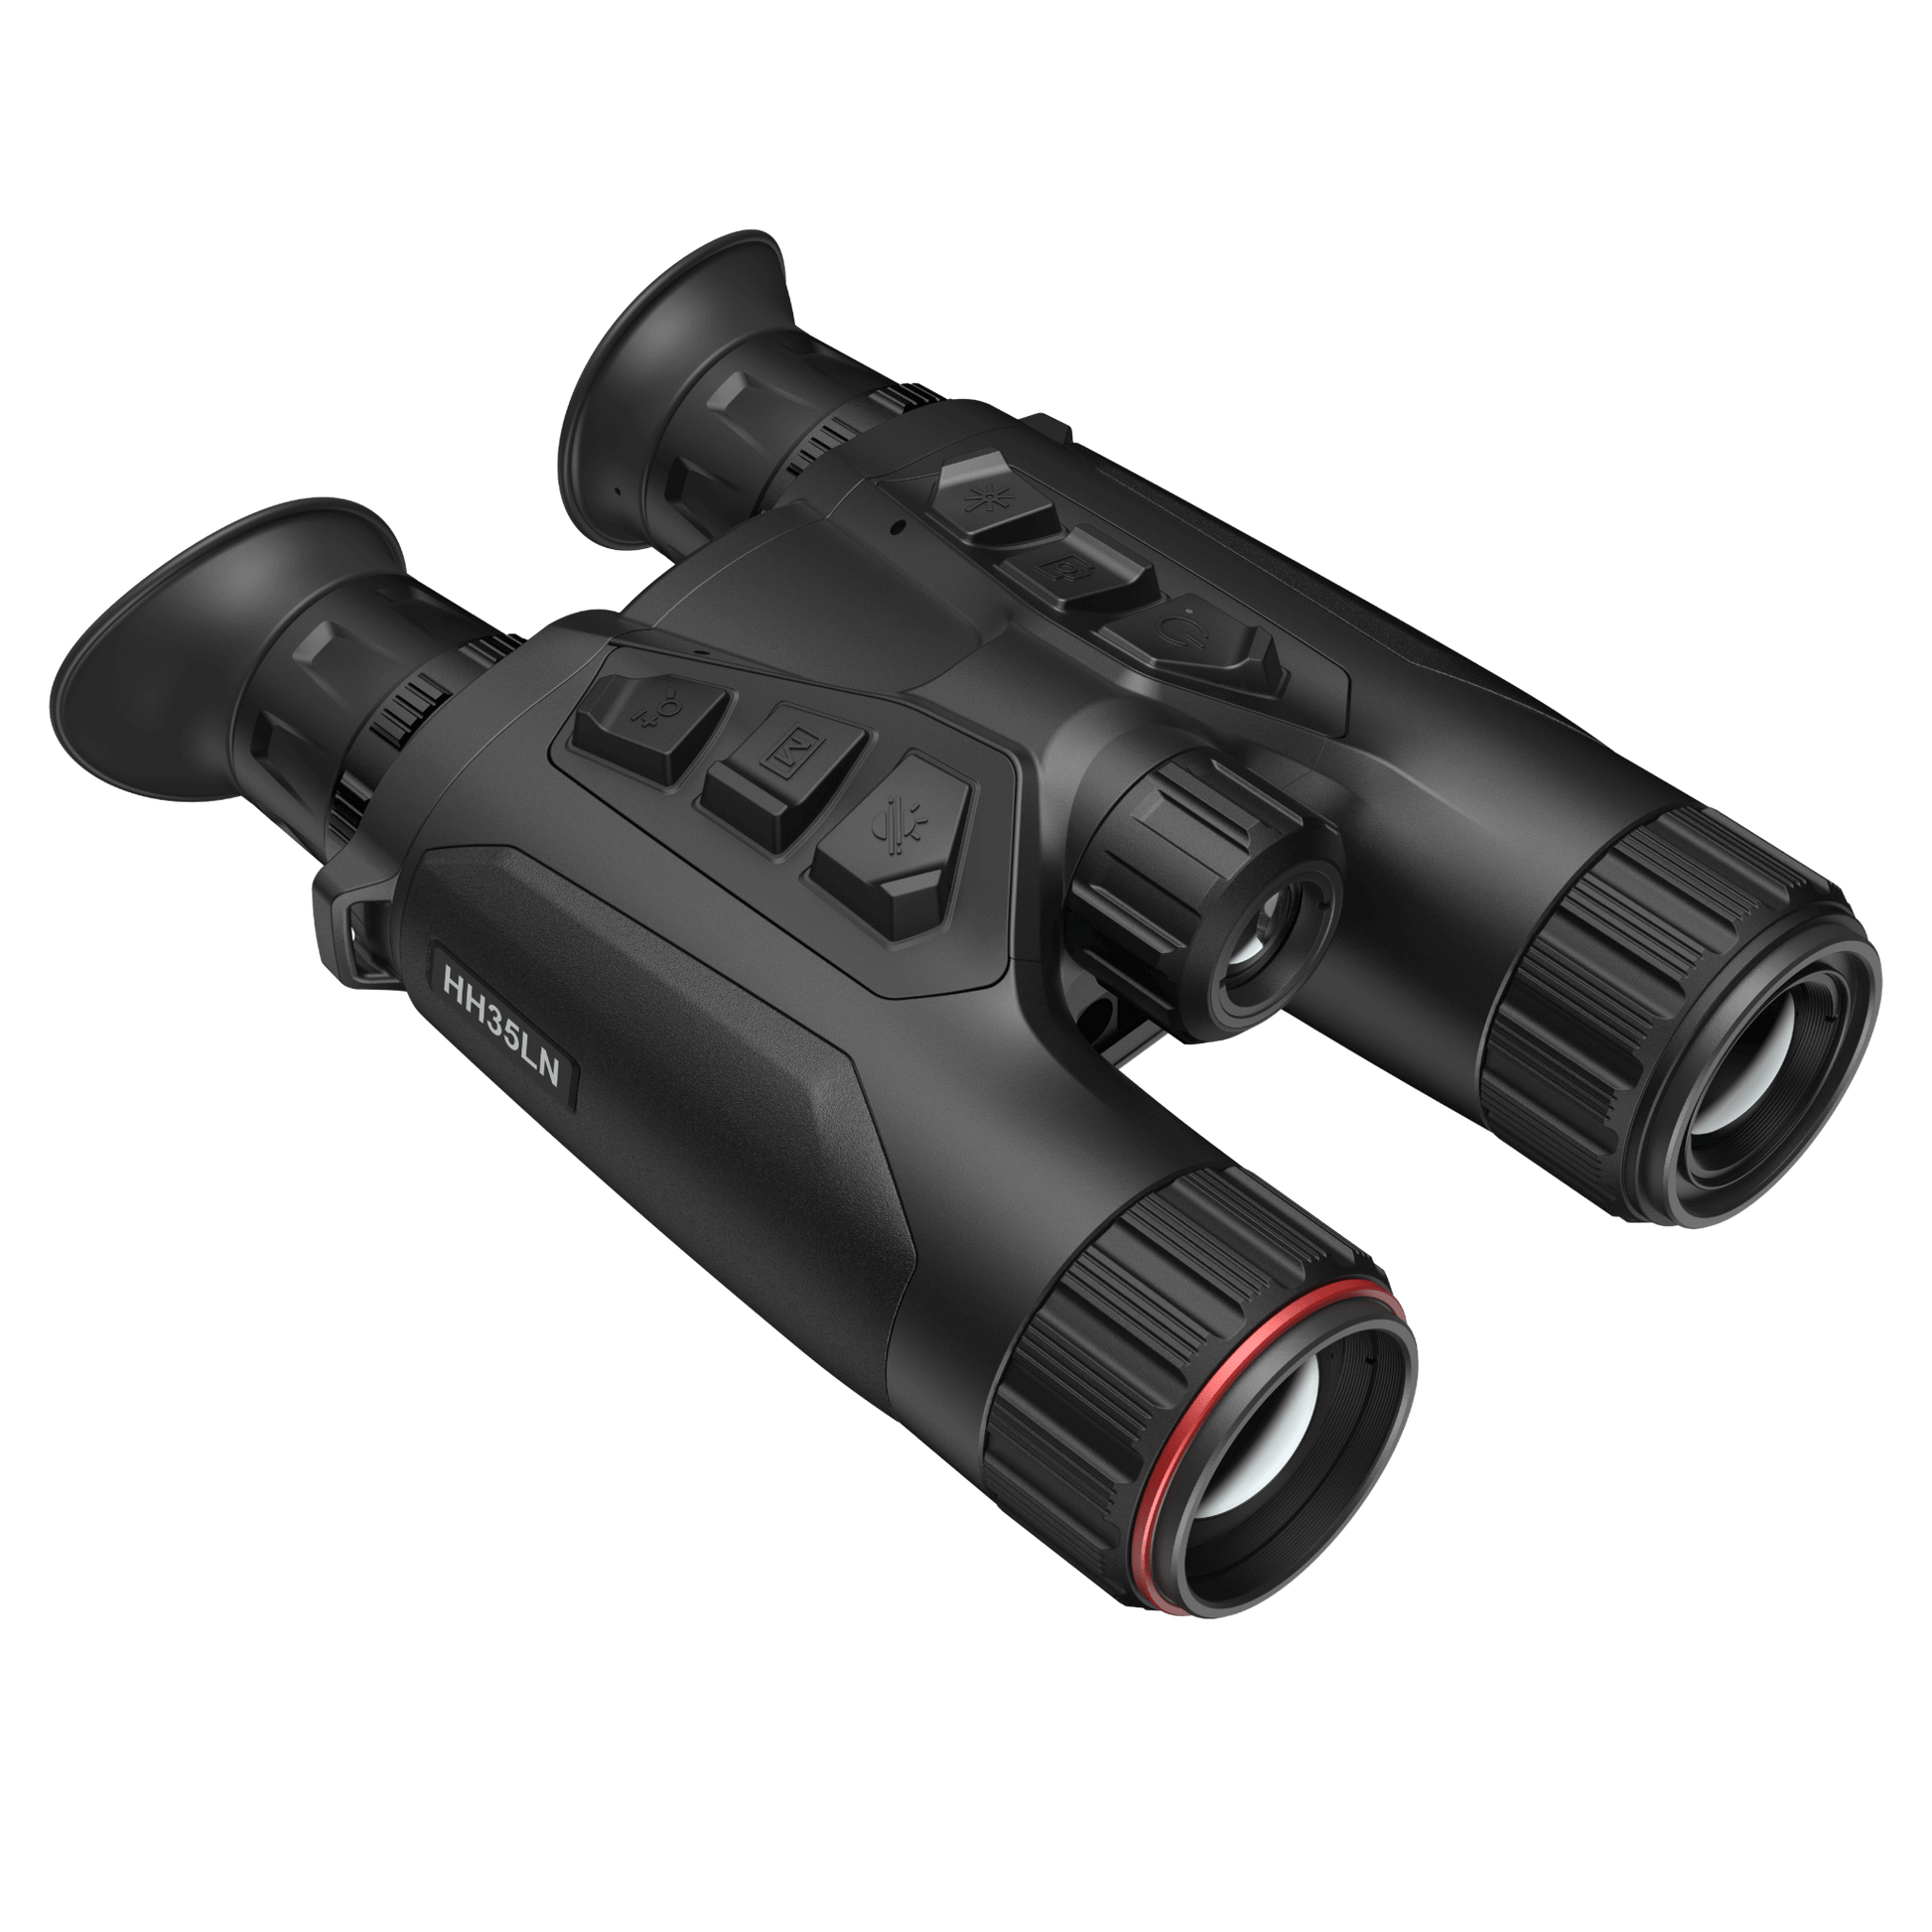 HikMicro Habrok HH35LN Multi-Spectrum Binoculars with Thermal Imaging - Front Right View